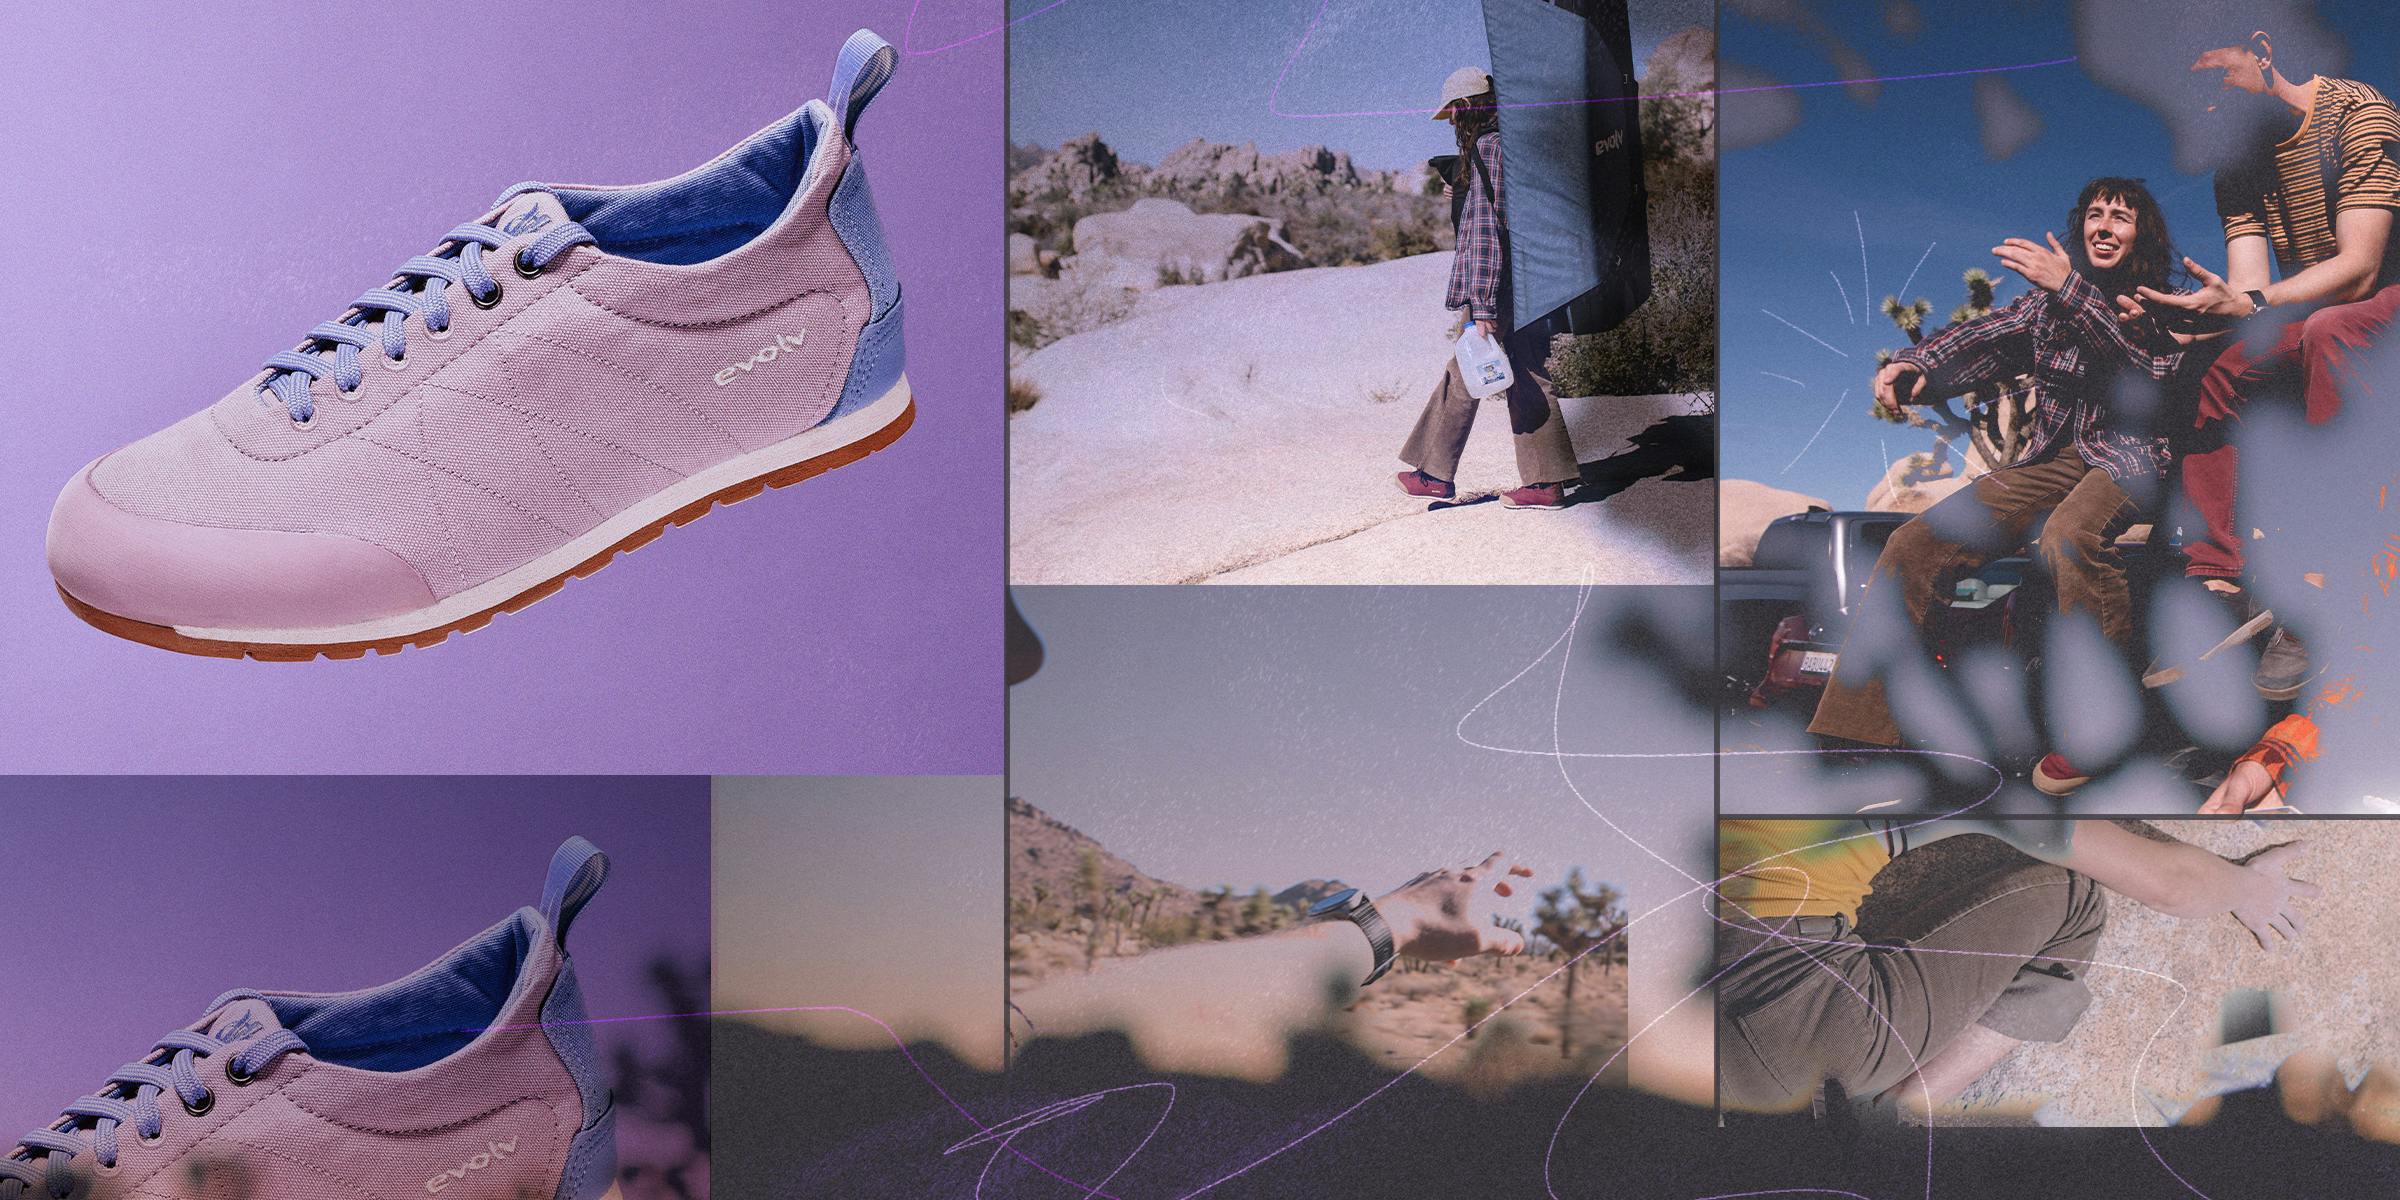 A sample of Evolv advertising graphics showcasing Evolv climbing shoes collaged overtop imagery.